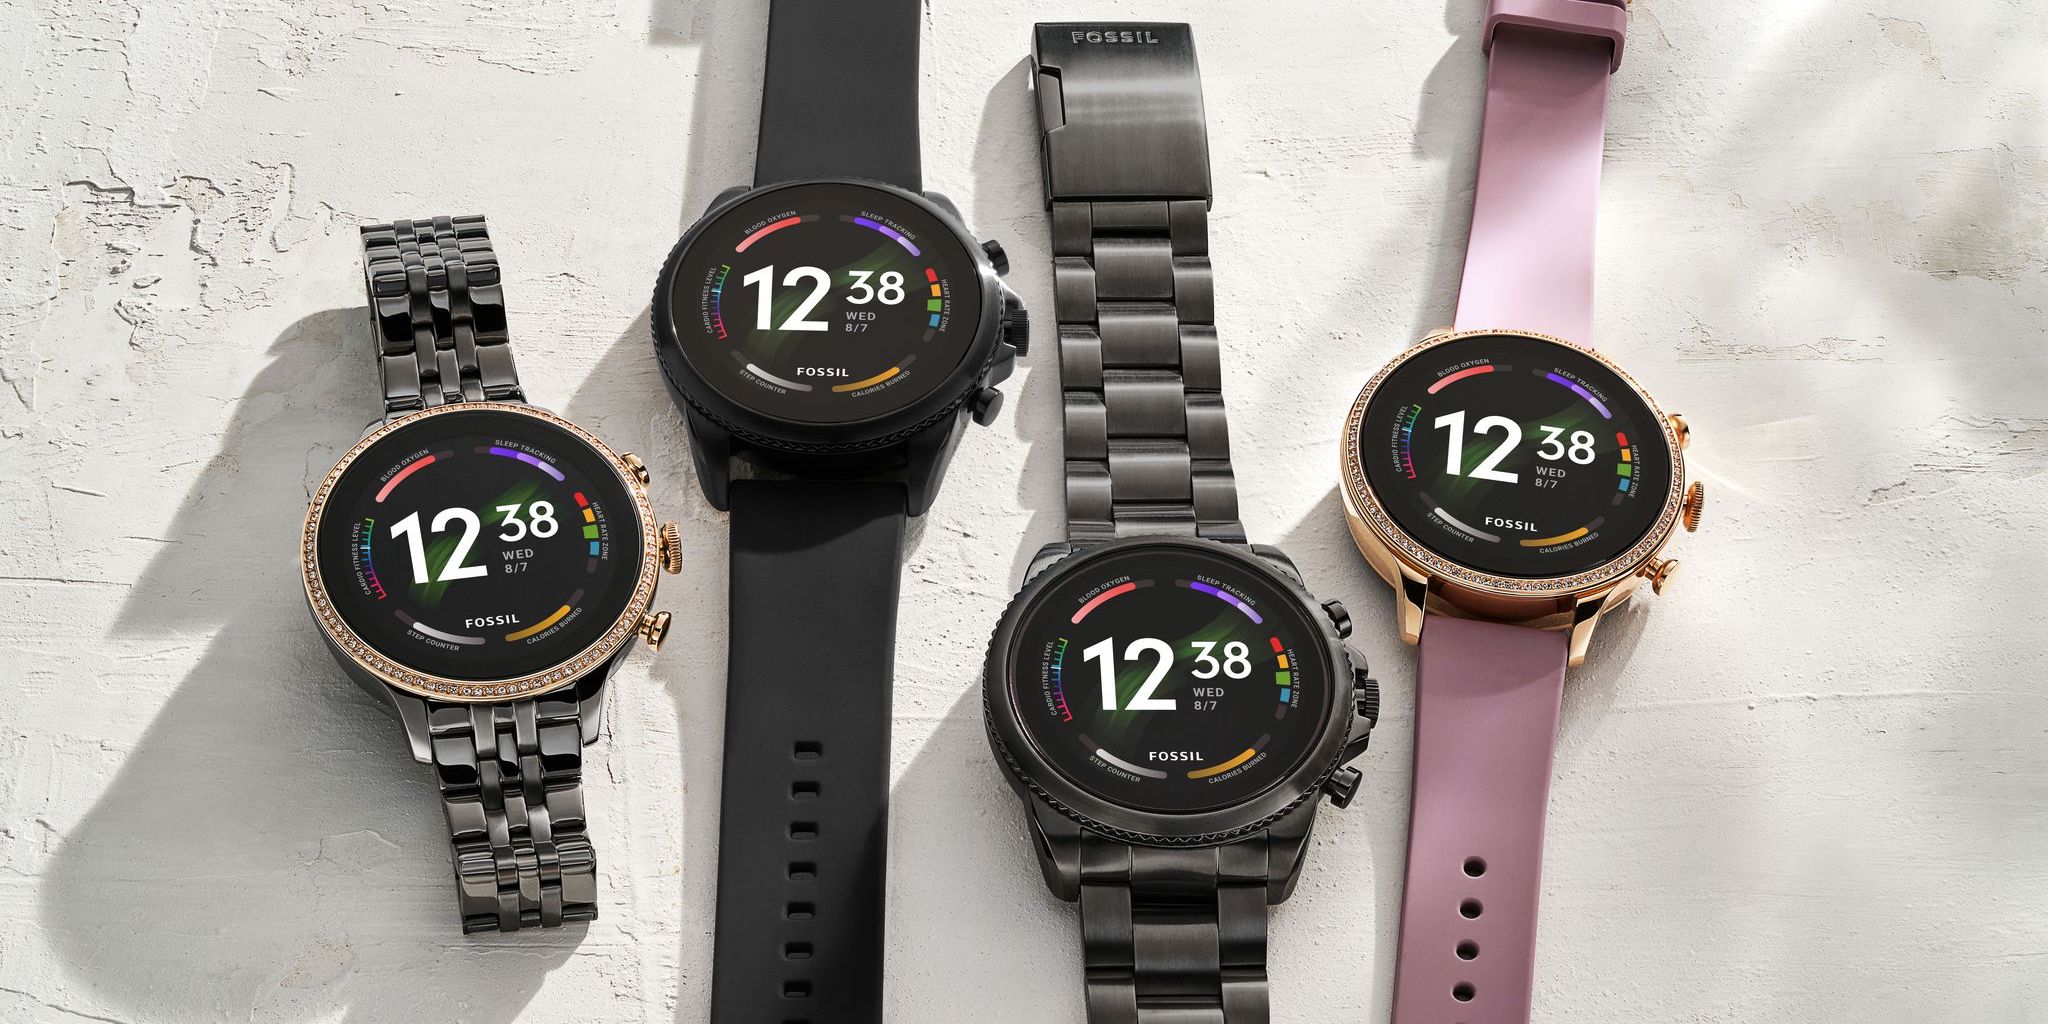 Fossil unveils Gen 6: 4100+, SpO2, Wear in OS - 9to5Google 2022 3 and